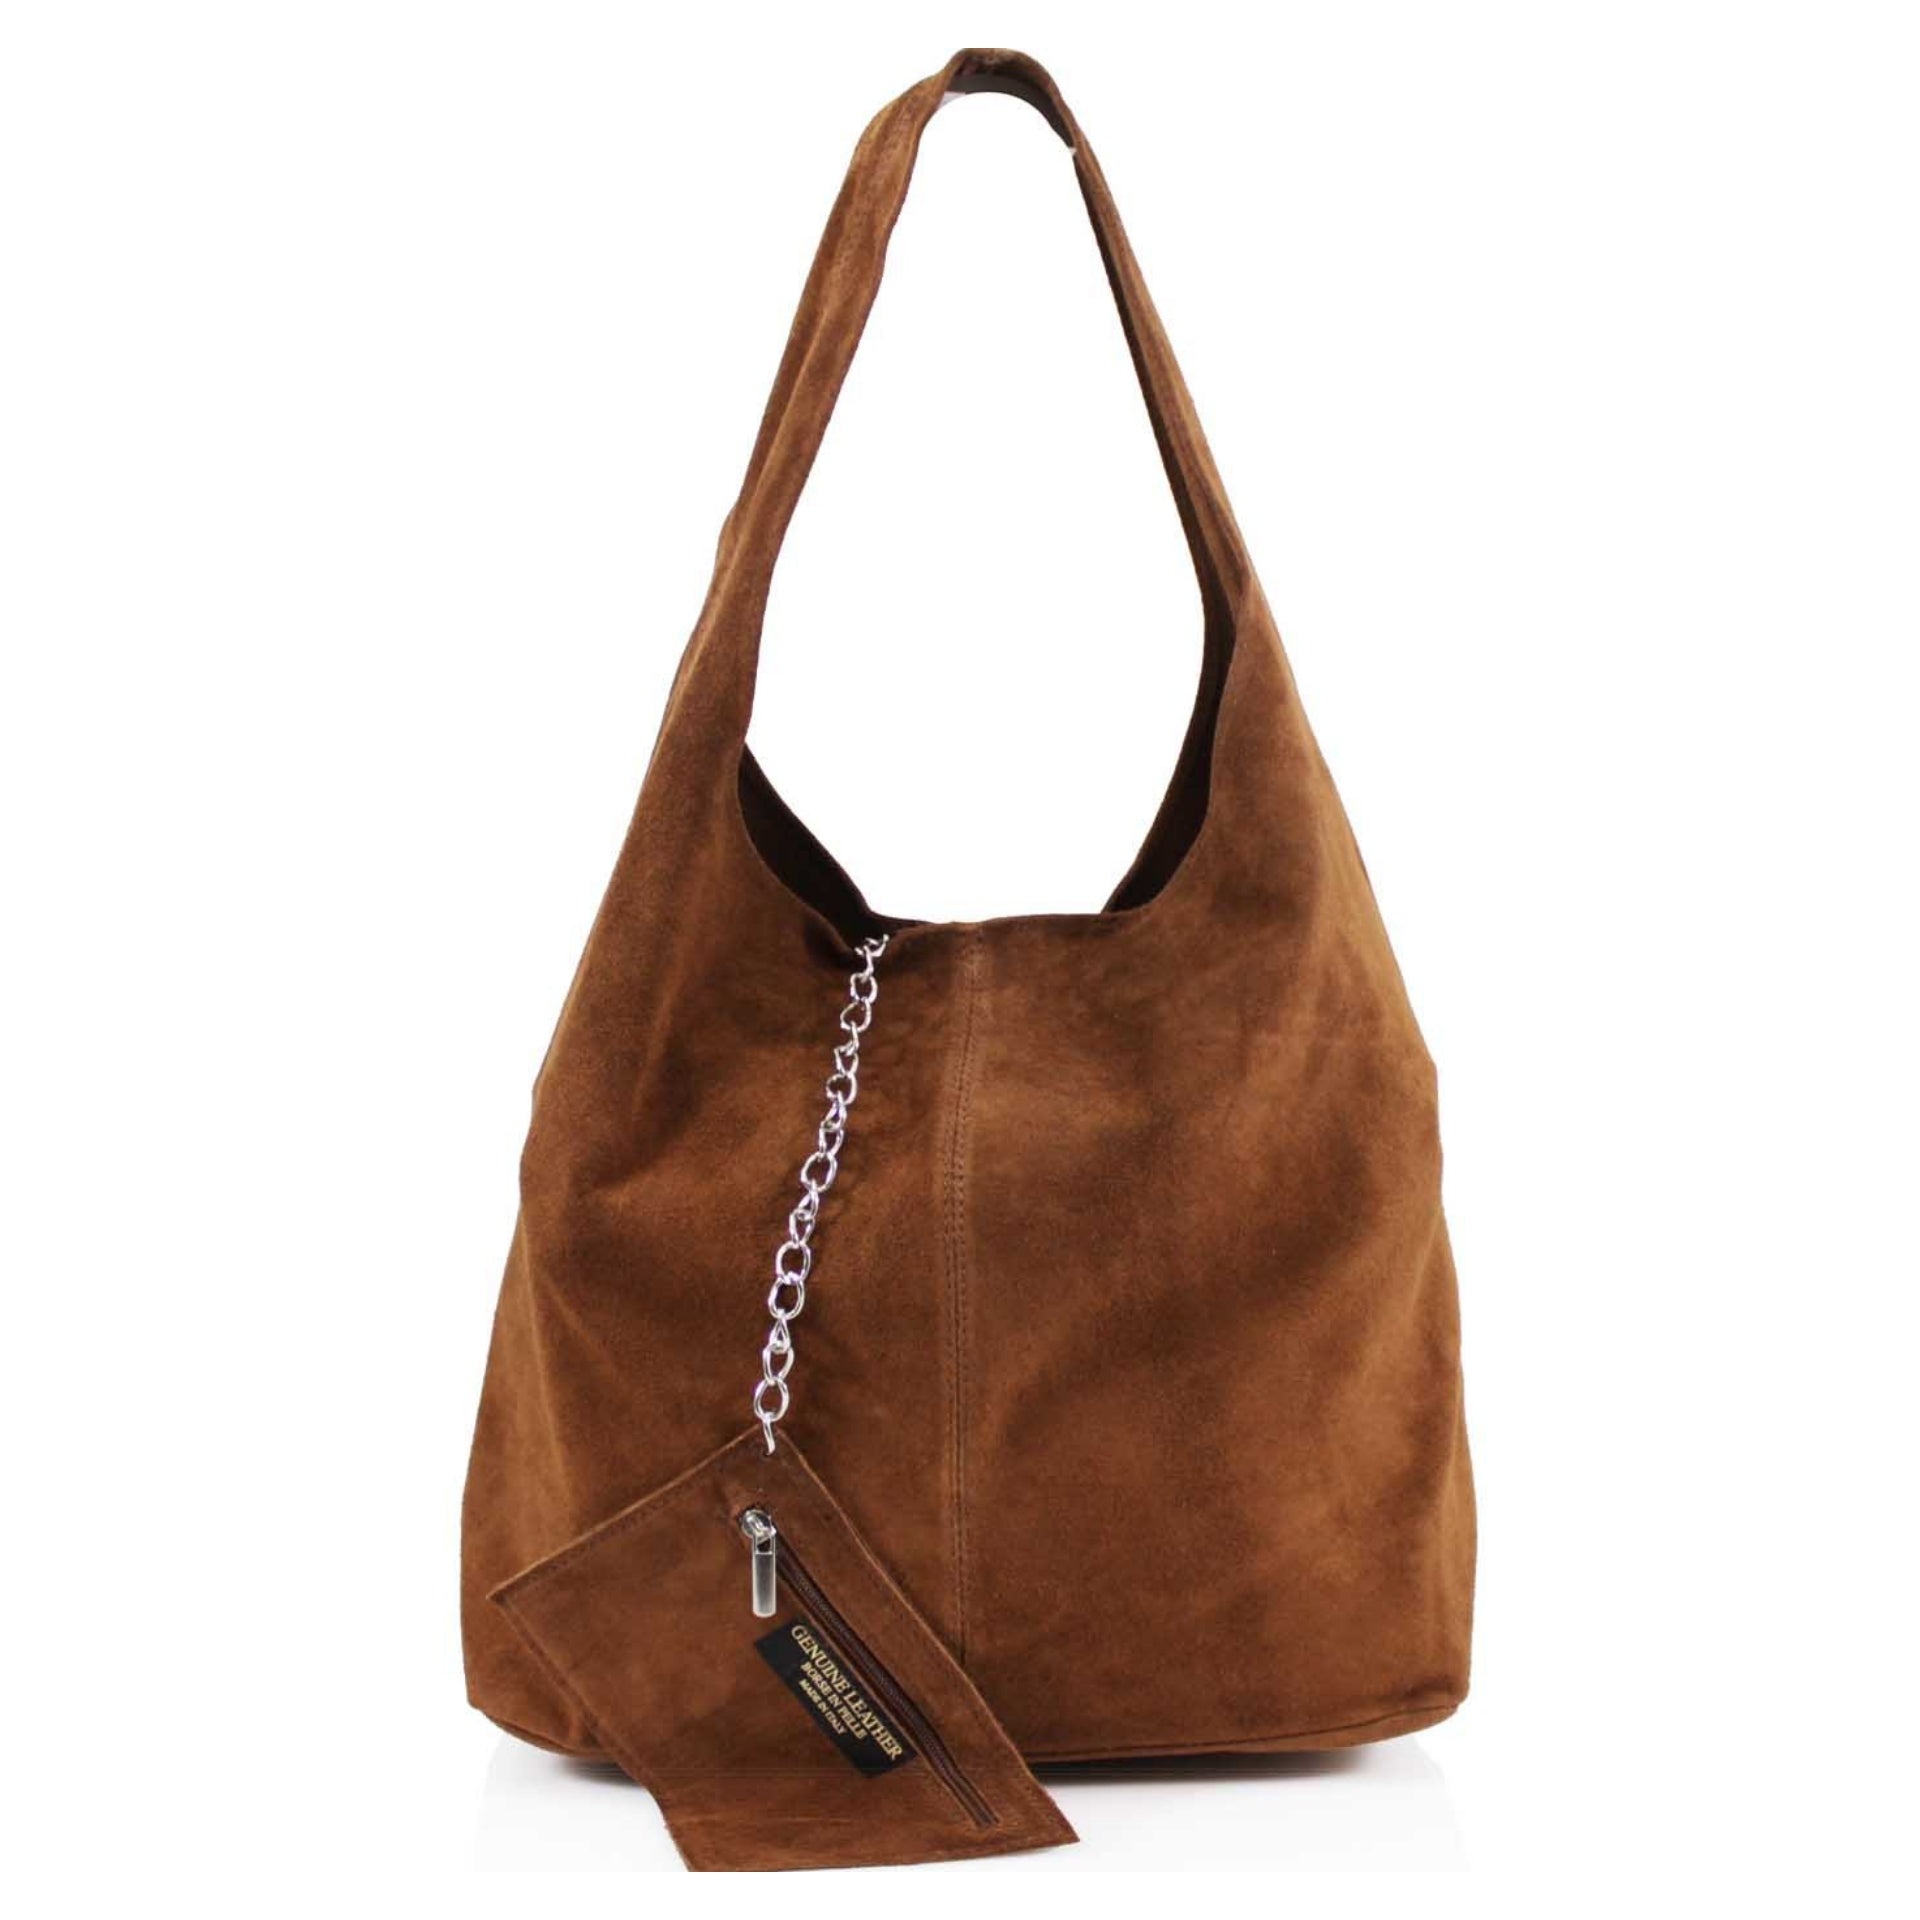 Expandable Genuine Italian Suede Leather Hobo Shoulder Bag